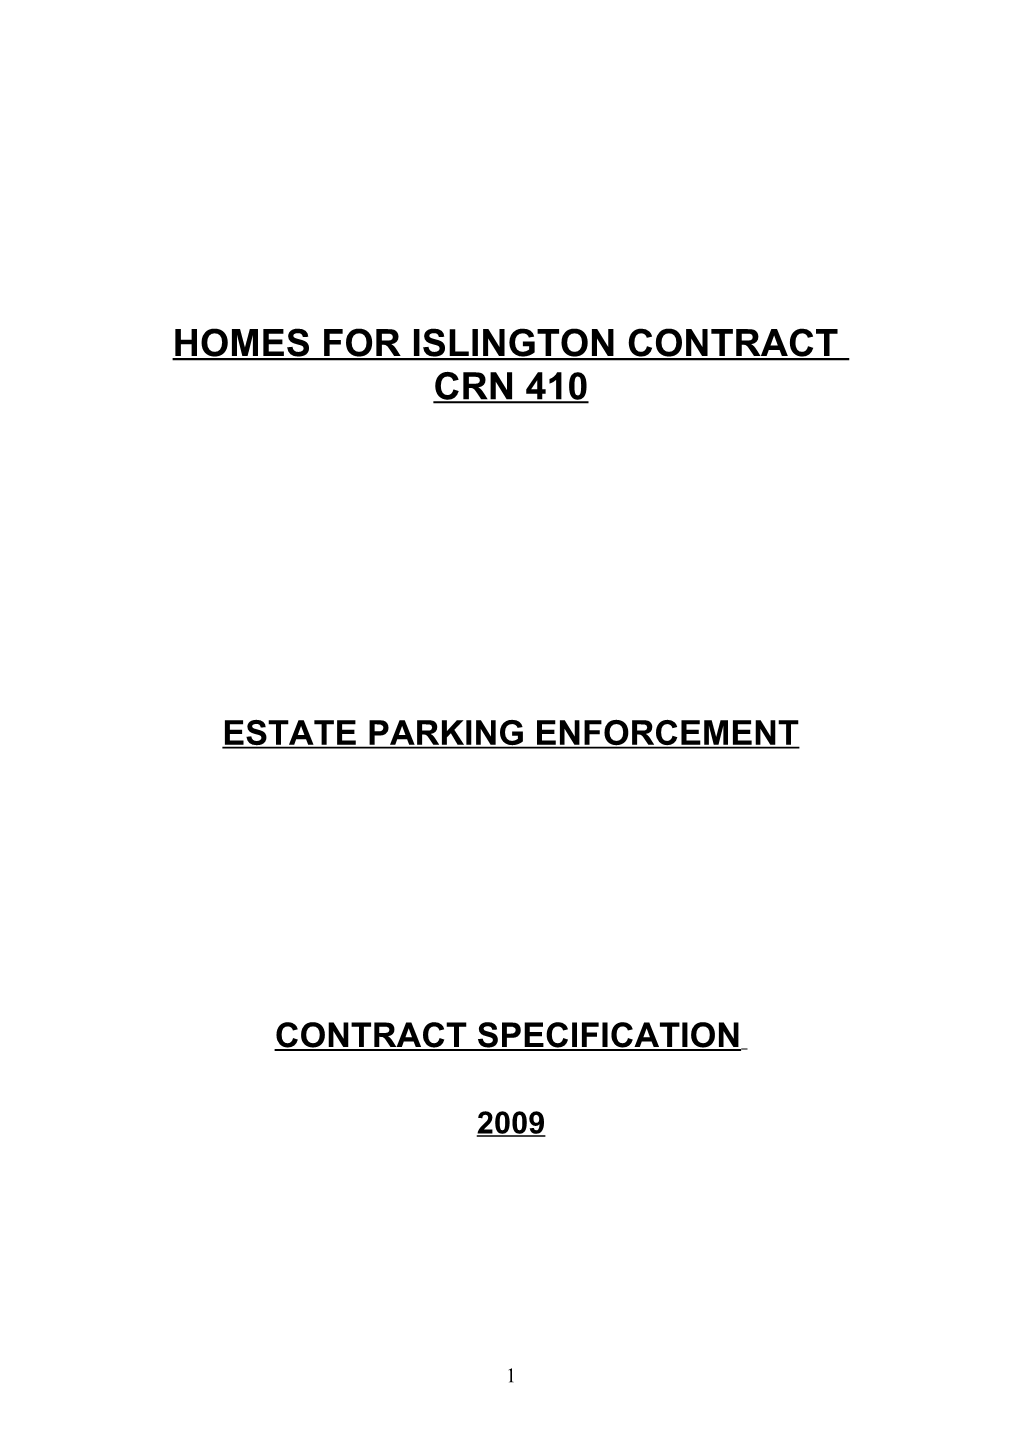 Homes for Islington Contract